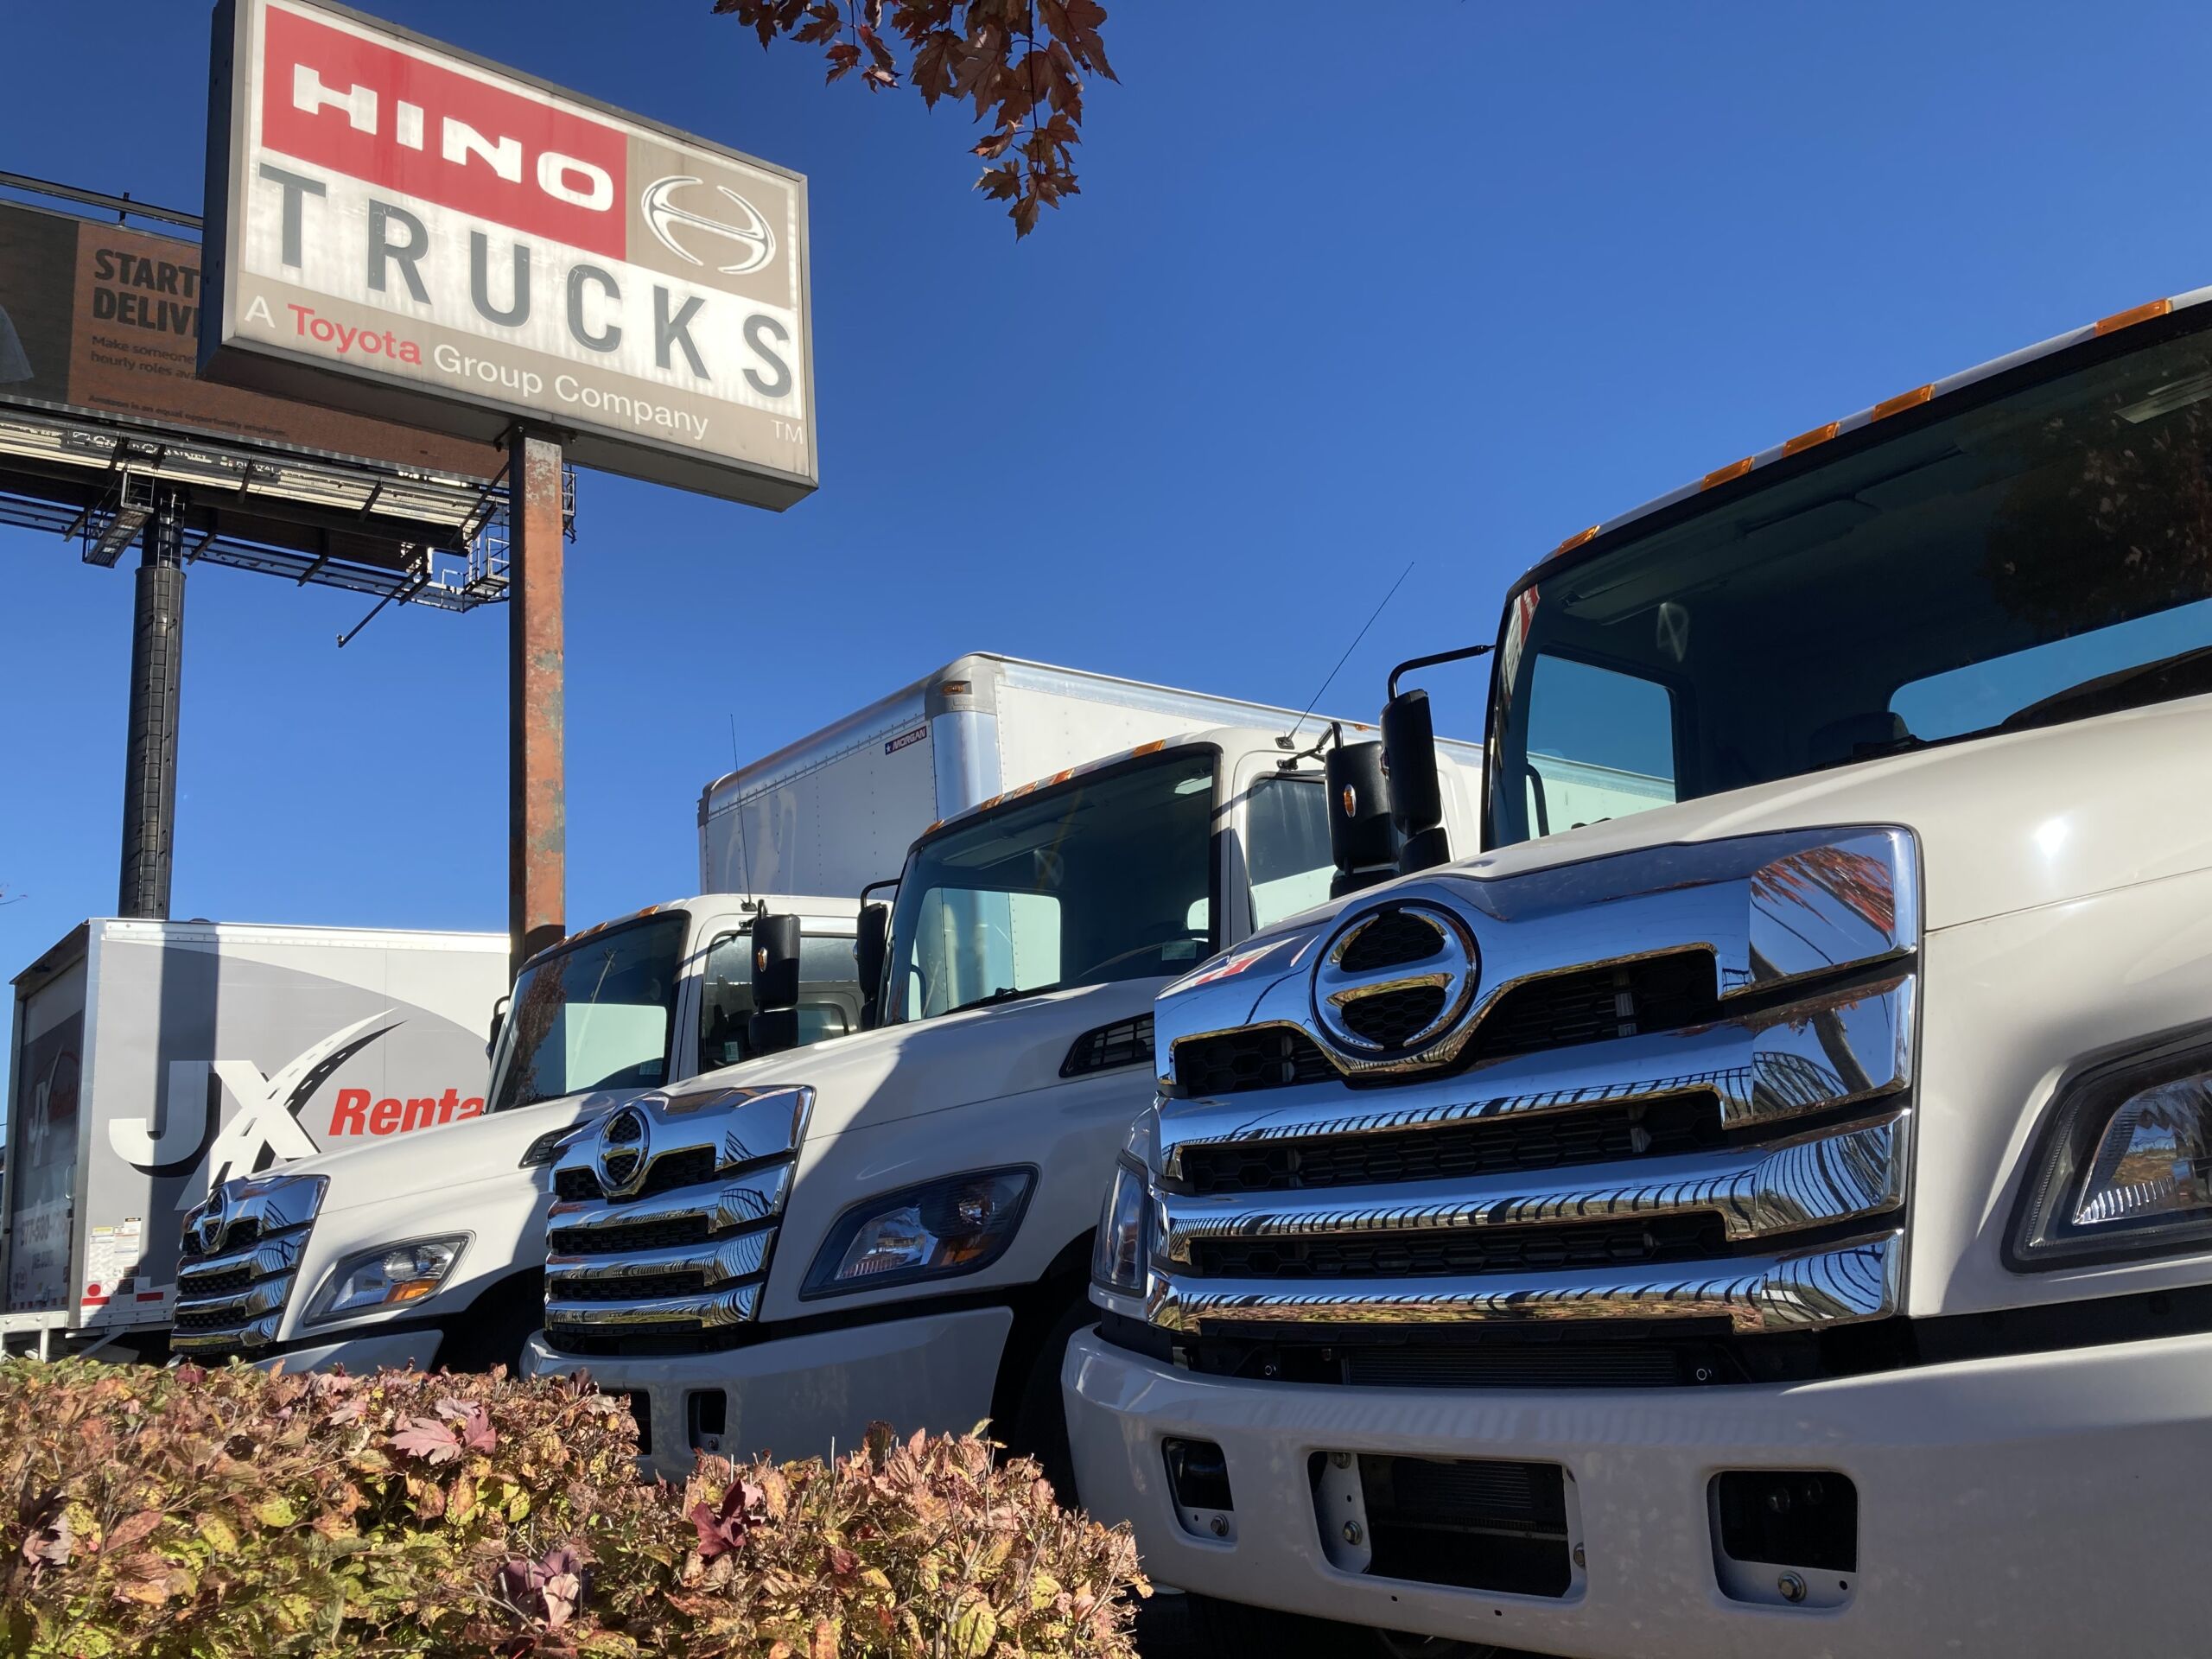 Three Hino Truck s lined up with the hino trucks signage